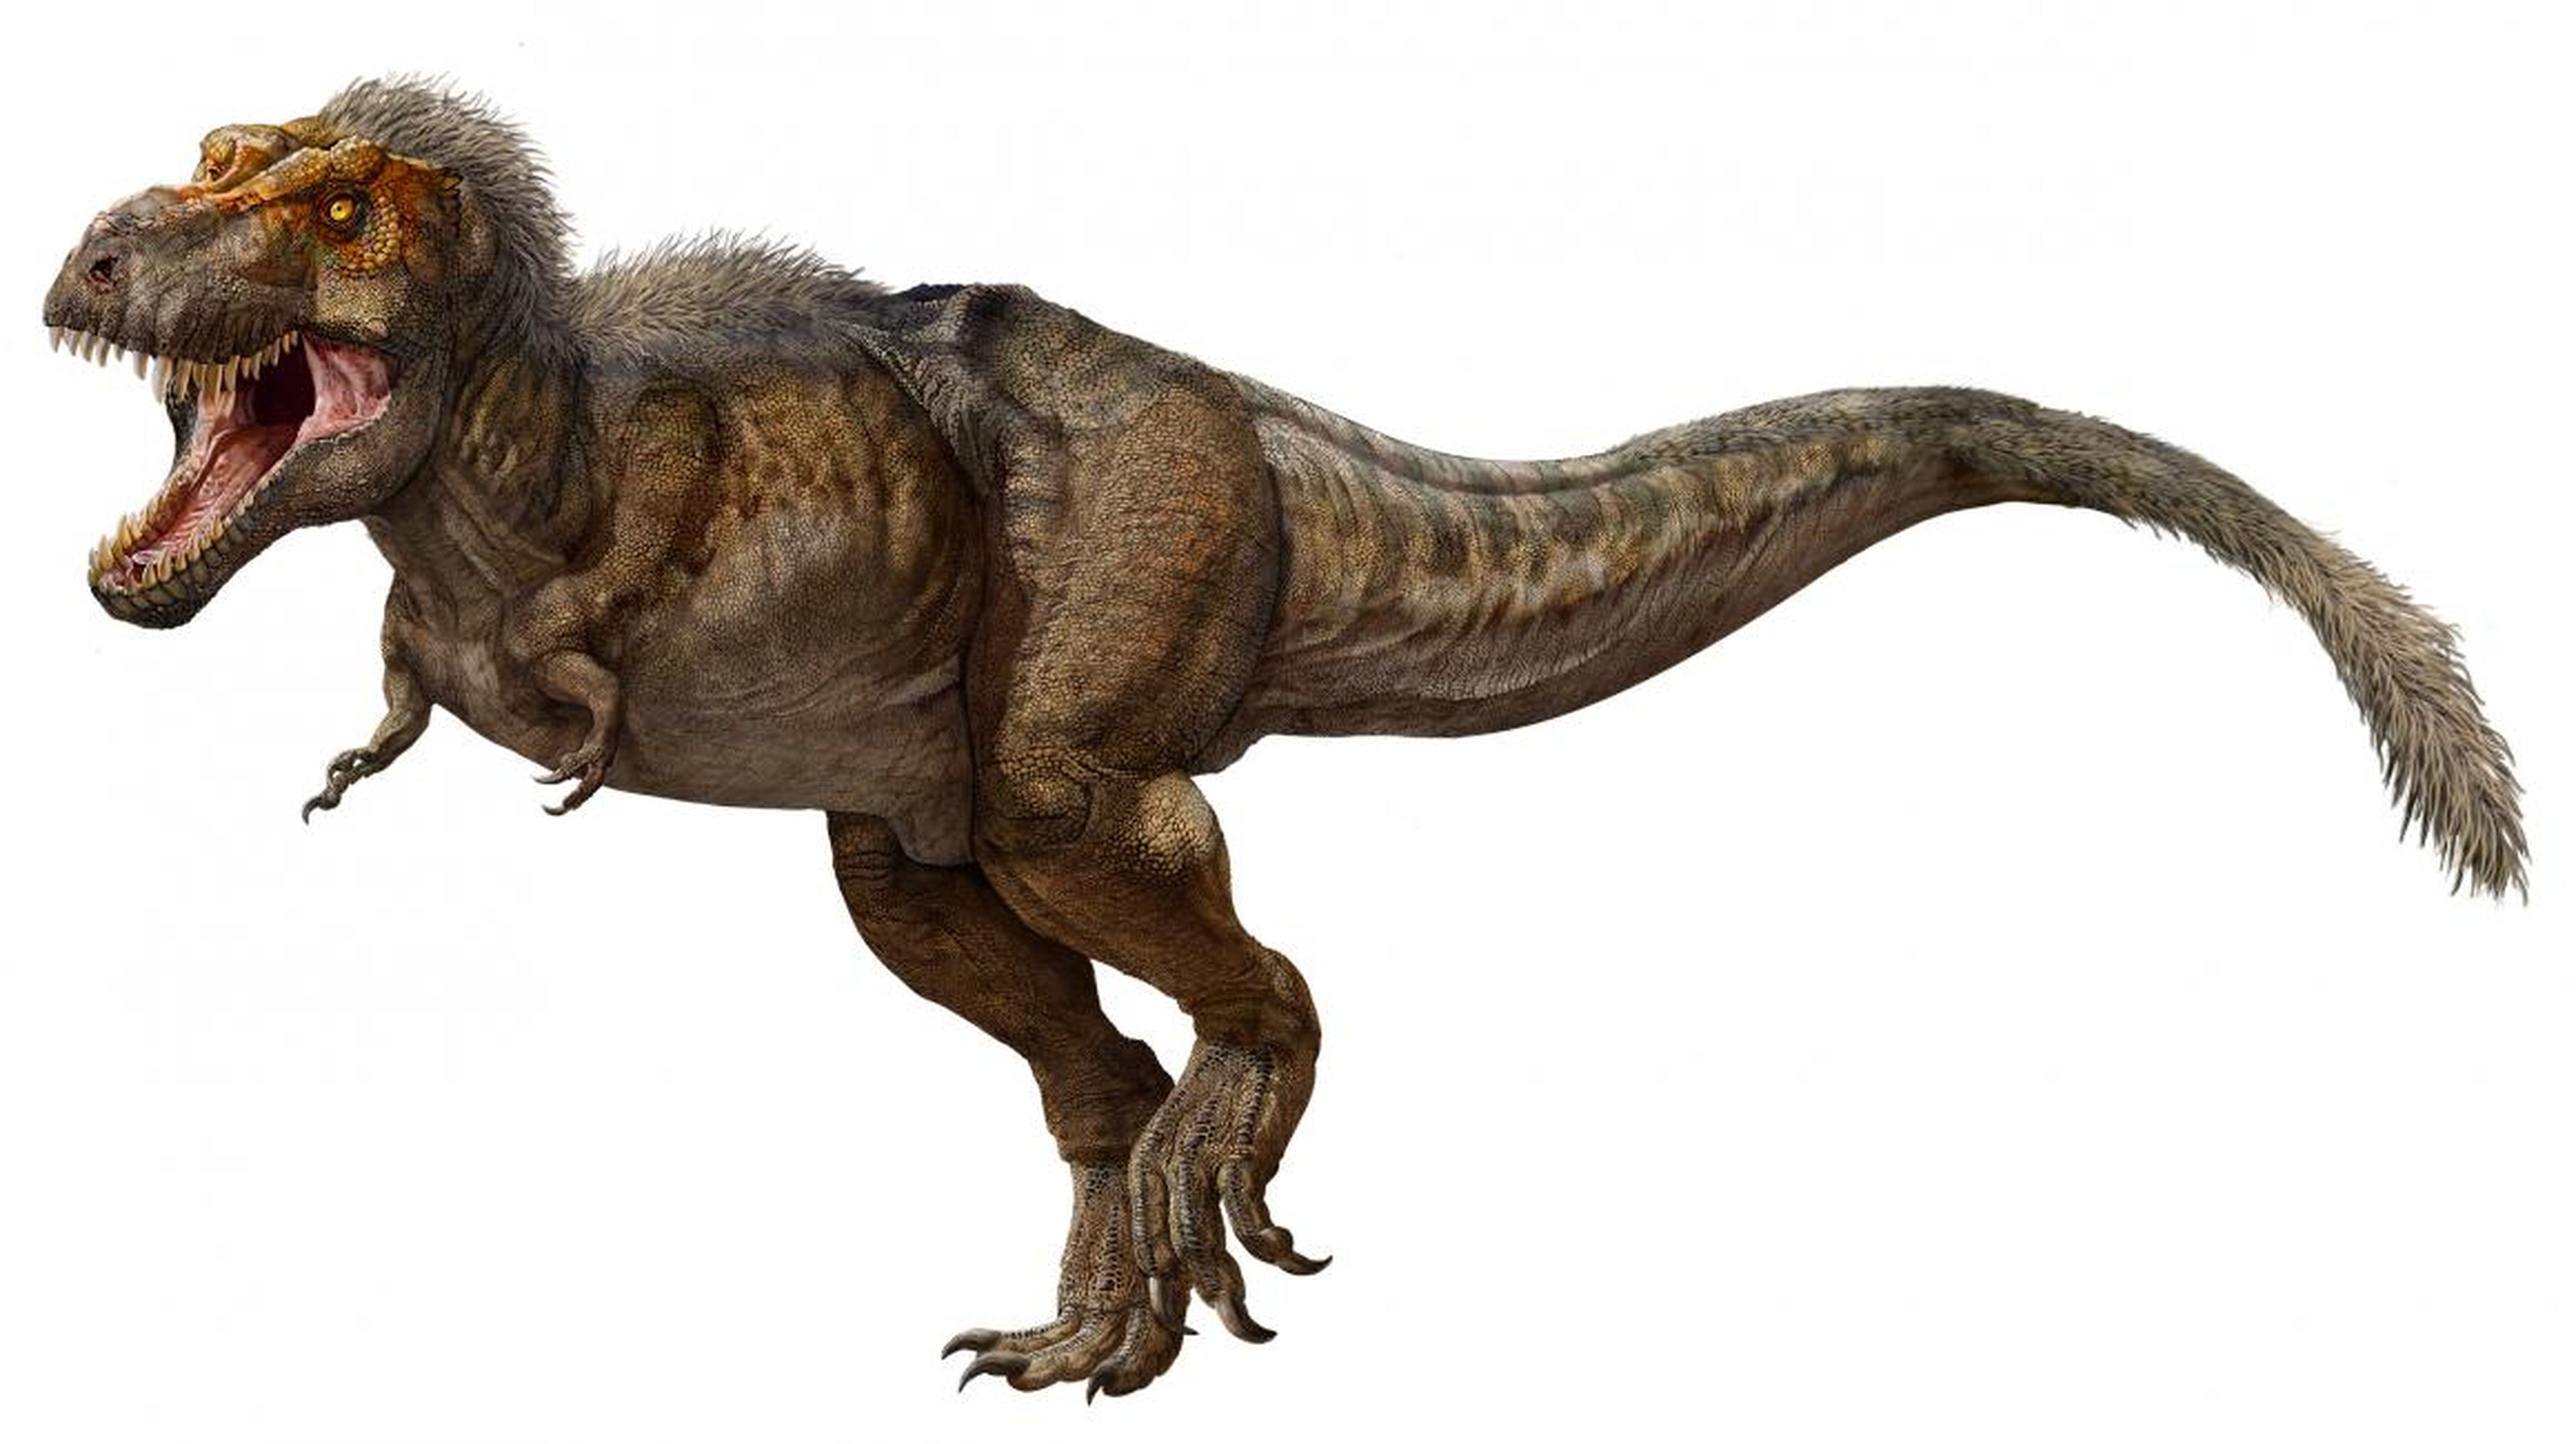 A full-grown Tyrannosaurus rex stood about 12 to 13 feet high at the hip, and was about 40 to 43 feet long.